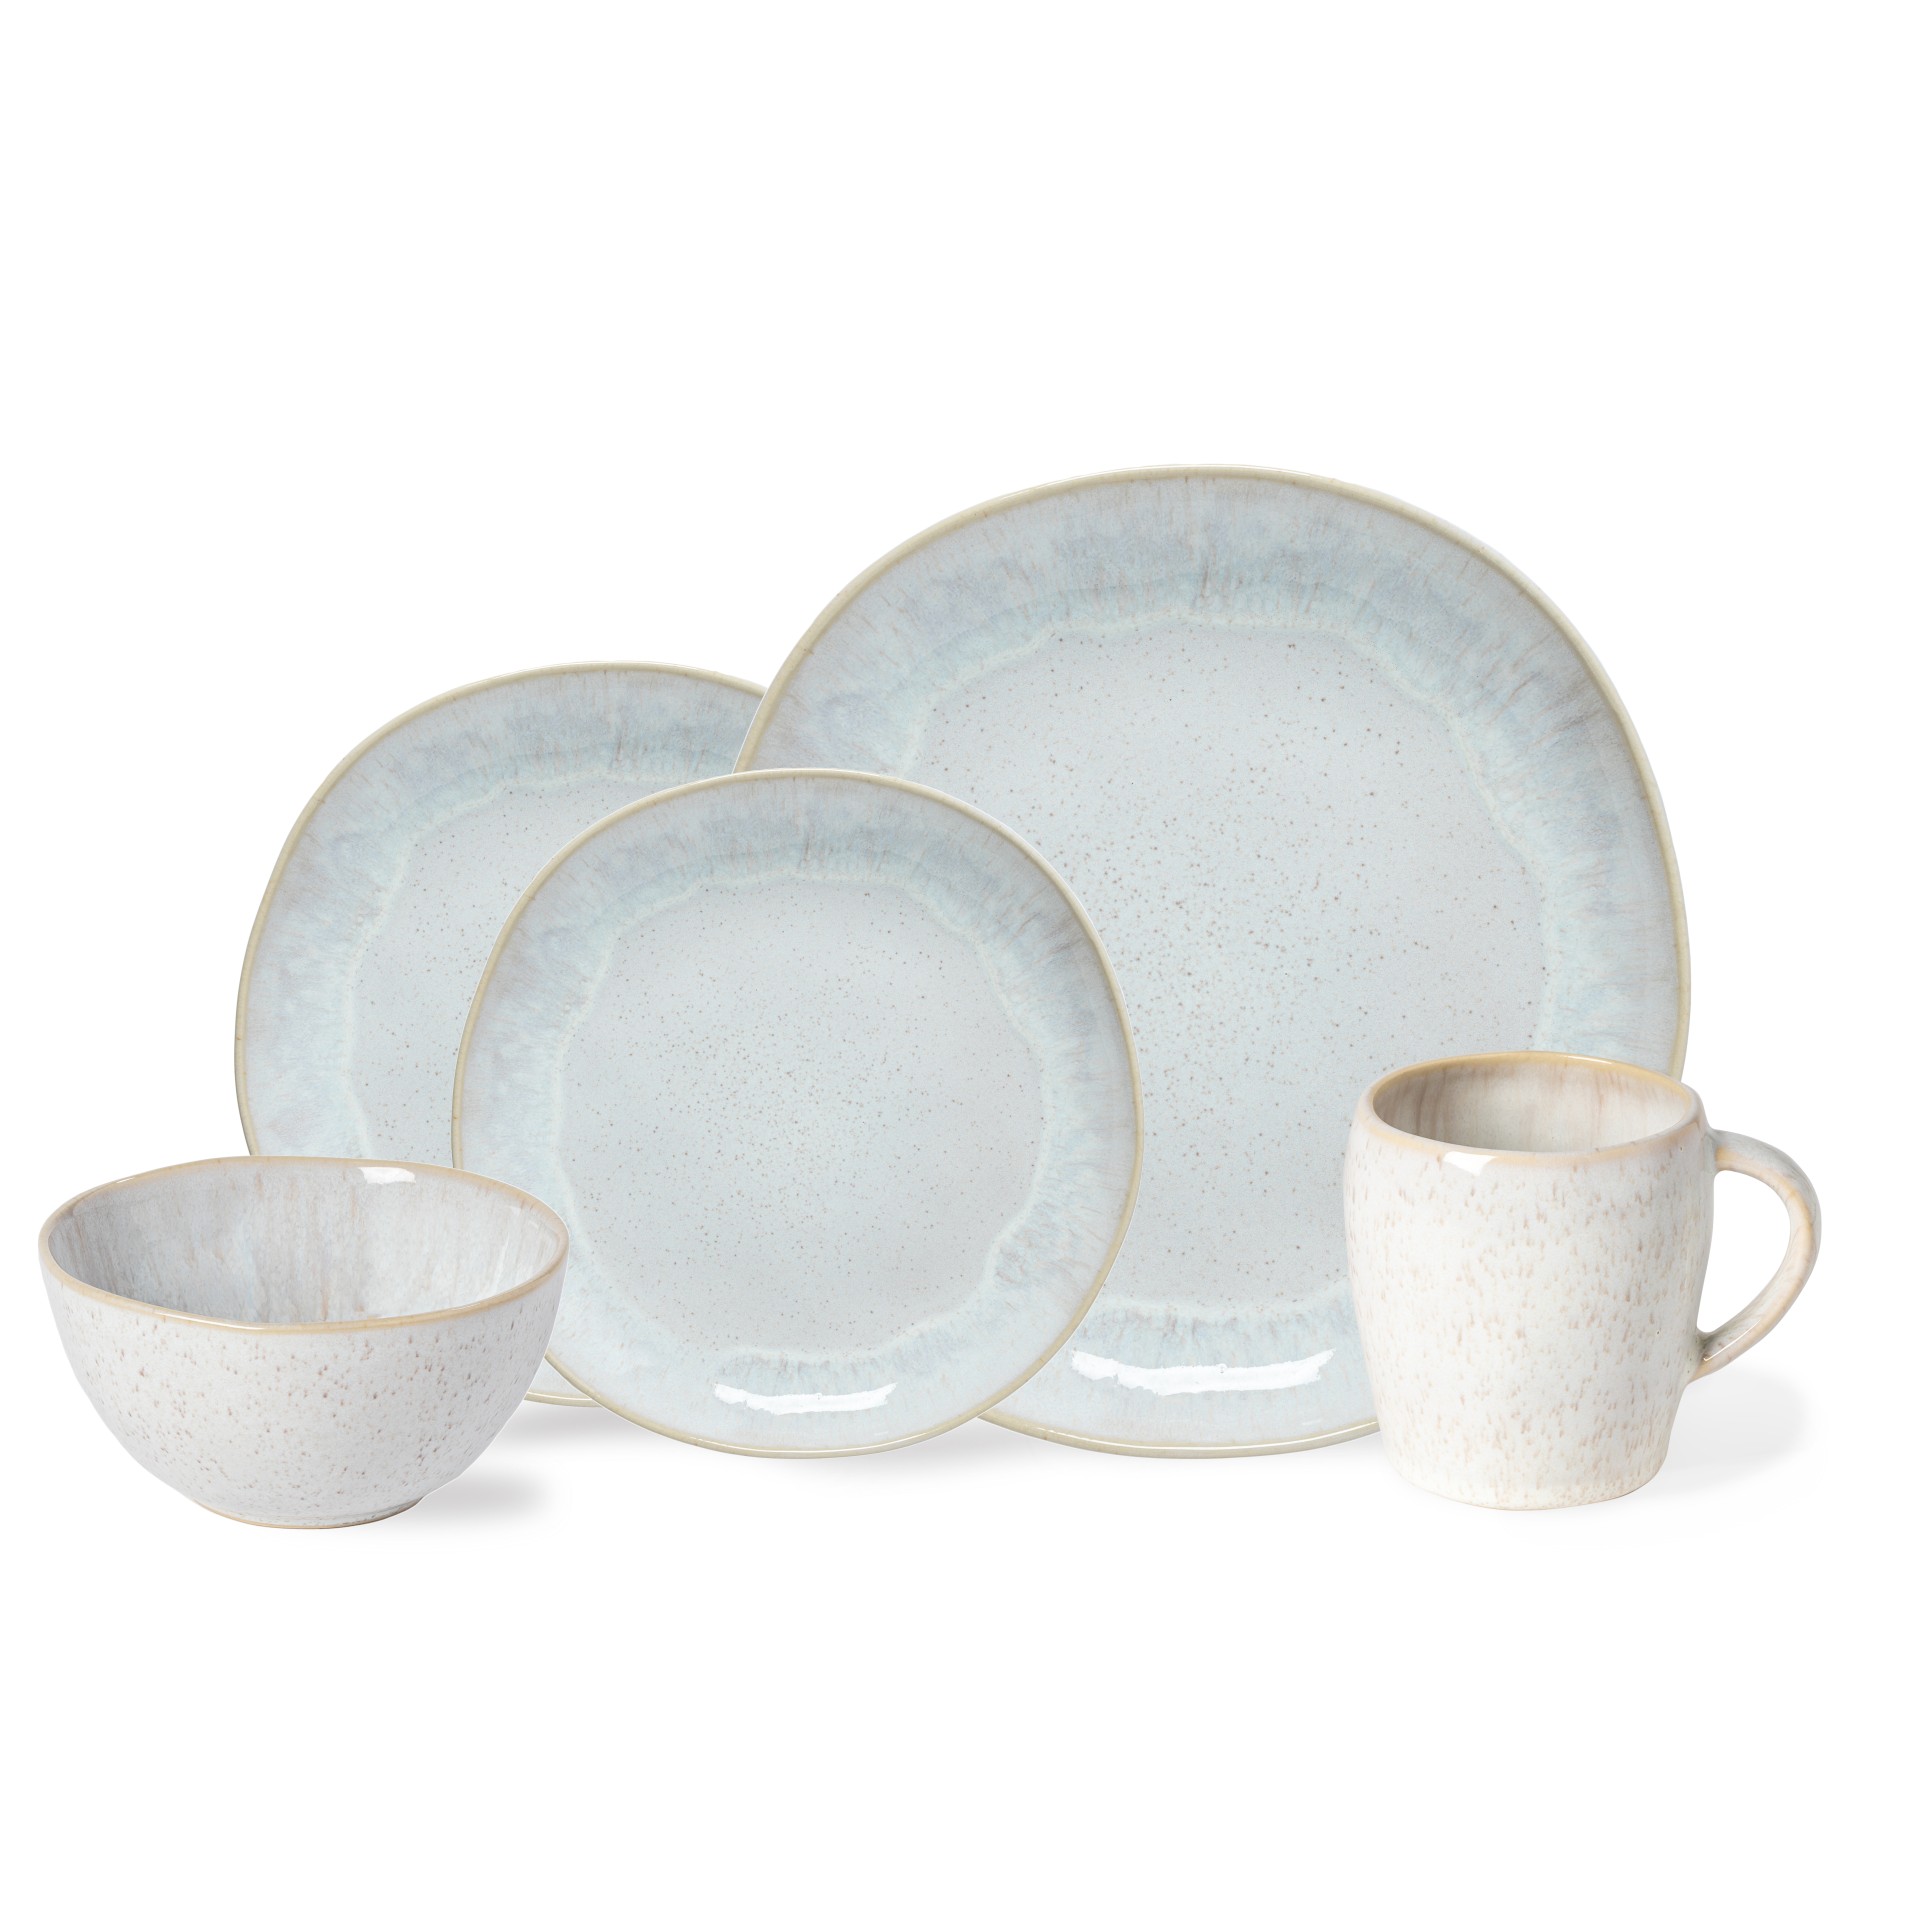 5 Piece Place Setting Eivissa by Casafina